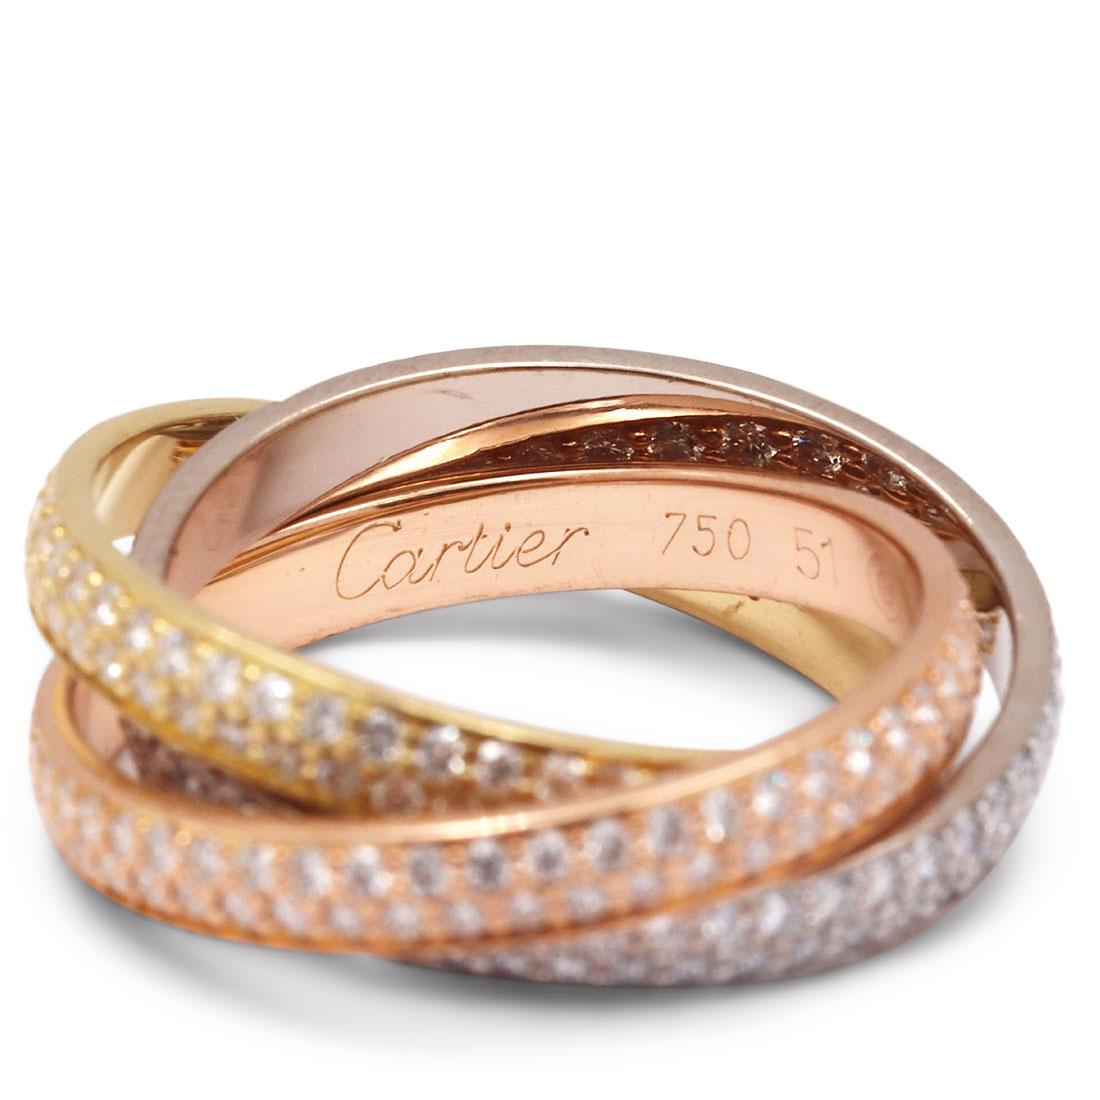 Authentic Cartier Trinity ring comprised of three interlocking mobile bands of 18 karat yellow, rose, and white gold. Each ring is encrusted with pave set high-quality round brilliant cut diamonds of an estimated 1.35 carats. Signed Cartier, 750,